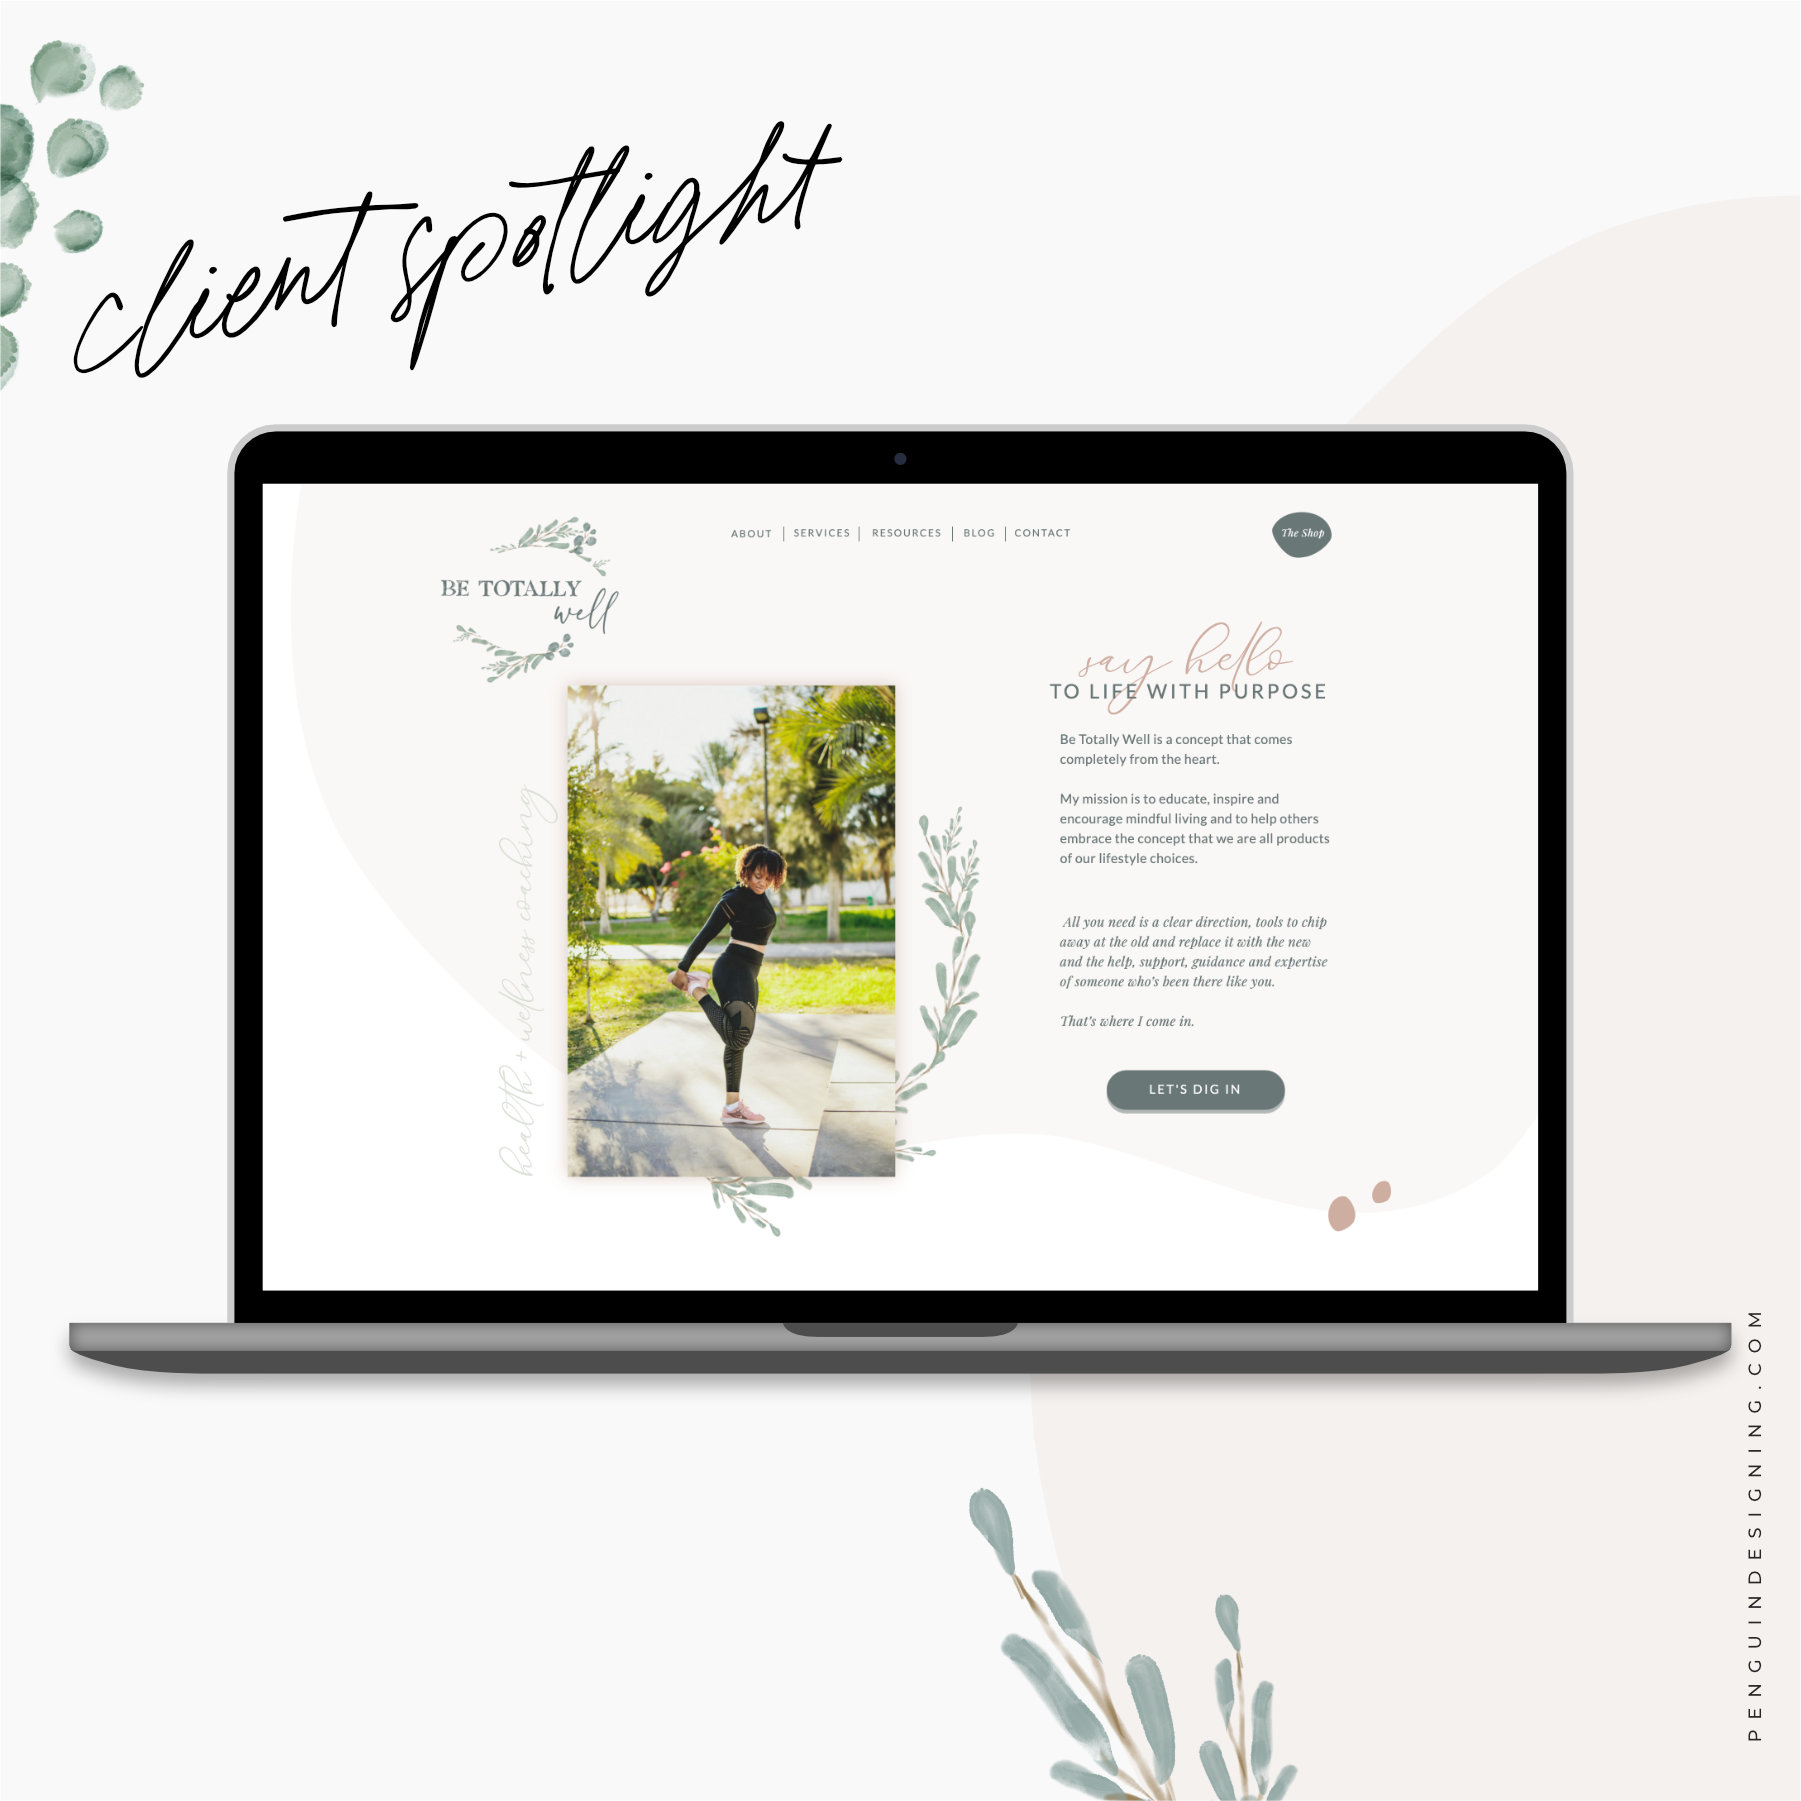 Showit website design by Penguin Designing for Be Totally well